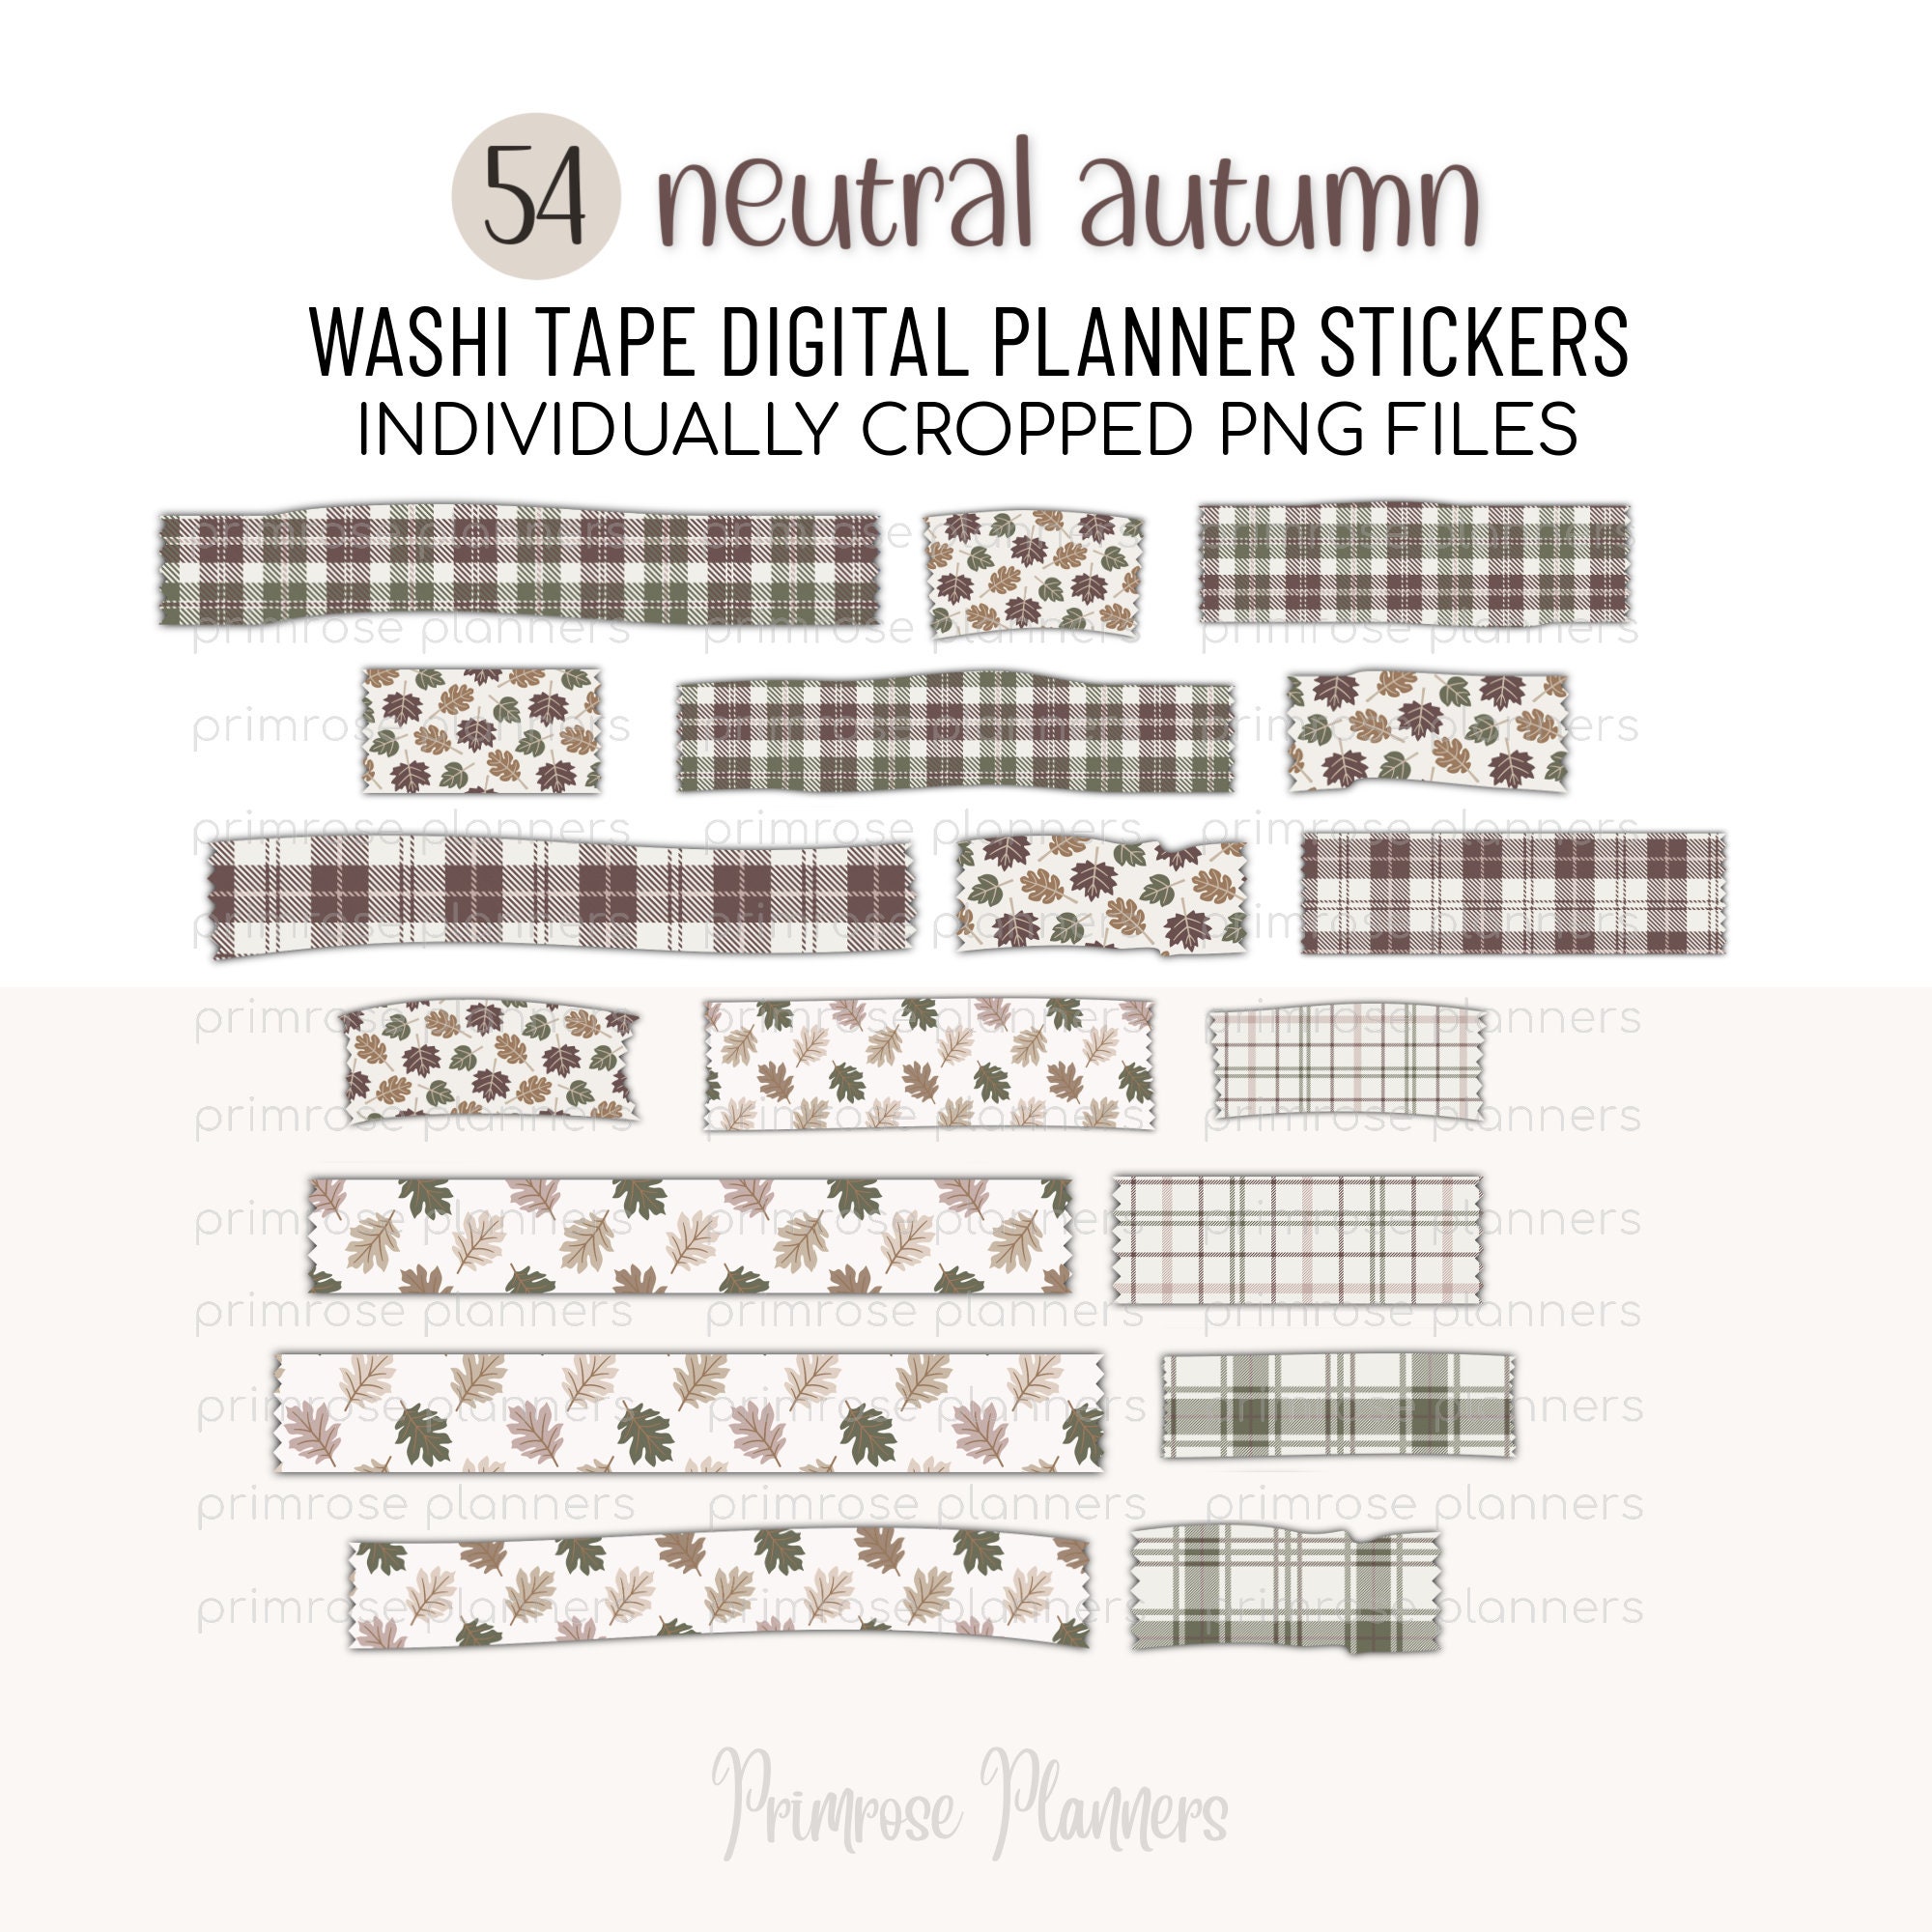 WINTER SNOWFLAKE Plaid Digital Washi Tape Stickers Washi Tape for  Goodnotes, Notability Winter Washi Tape for Digital Planners Clipart 